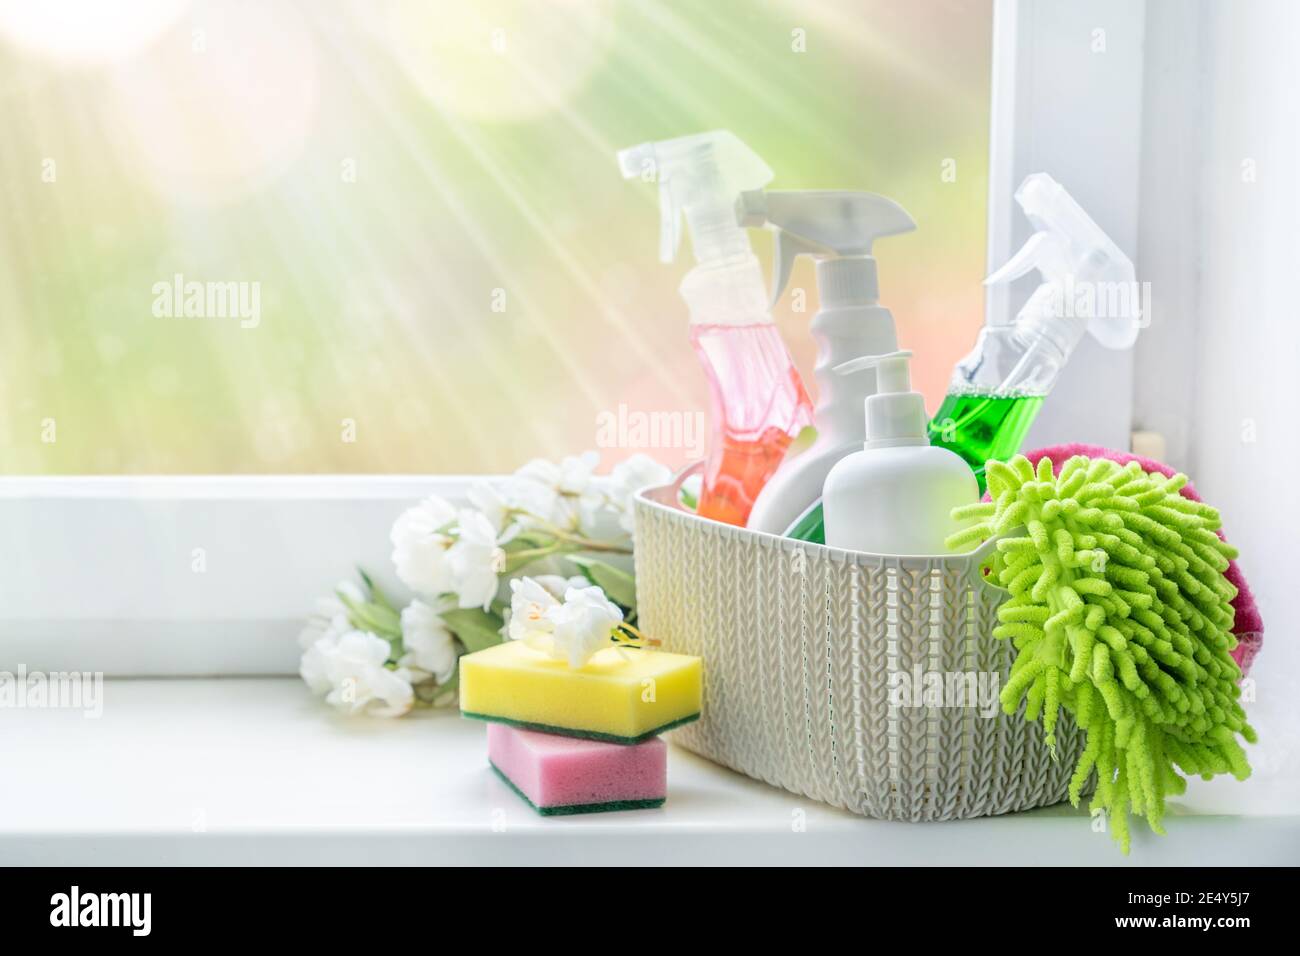 https://c8.alamy.com/comp/2E4Y5J7/spring-cleaning-concept-cleaning-supplies-and-flowers-on-blur-background-2E4Y5J7.jpg